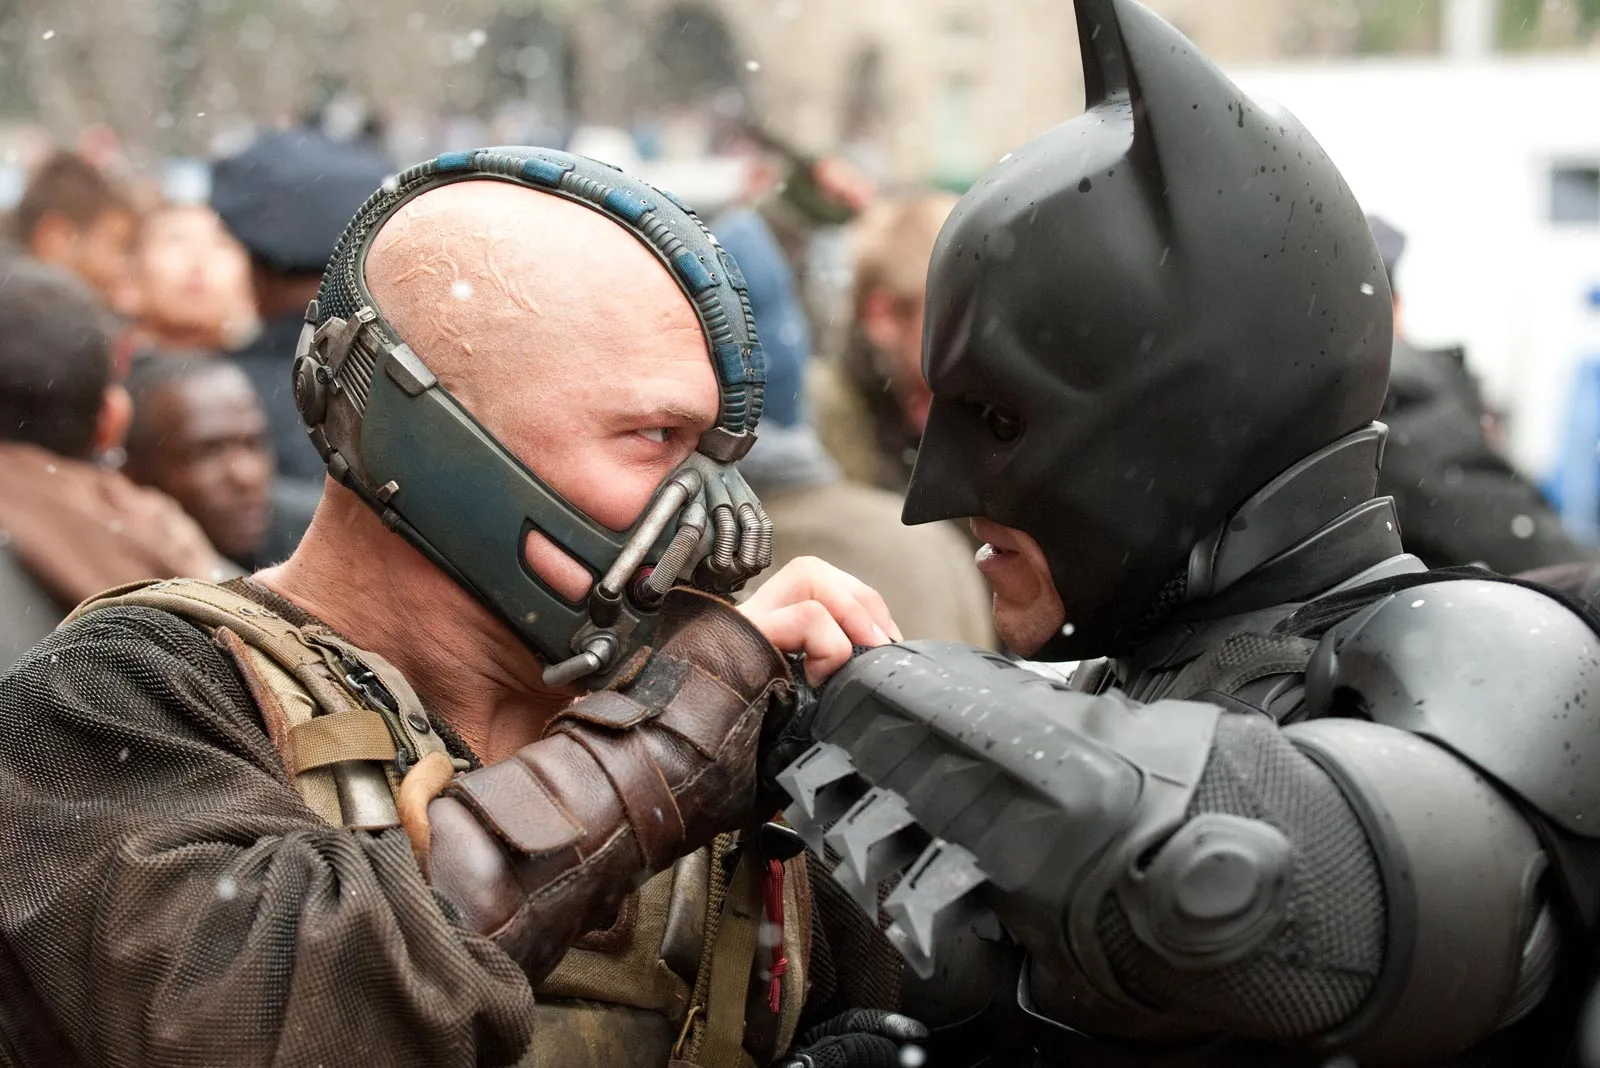 The Dark Knight Rises.Batman Movies in Order: How to Watch Them Online?